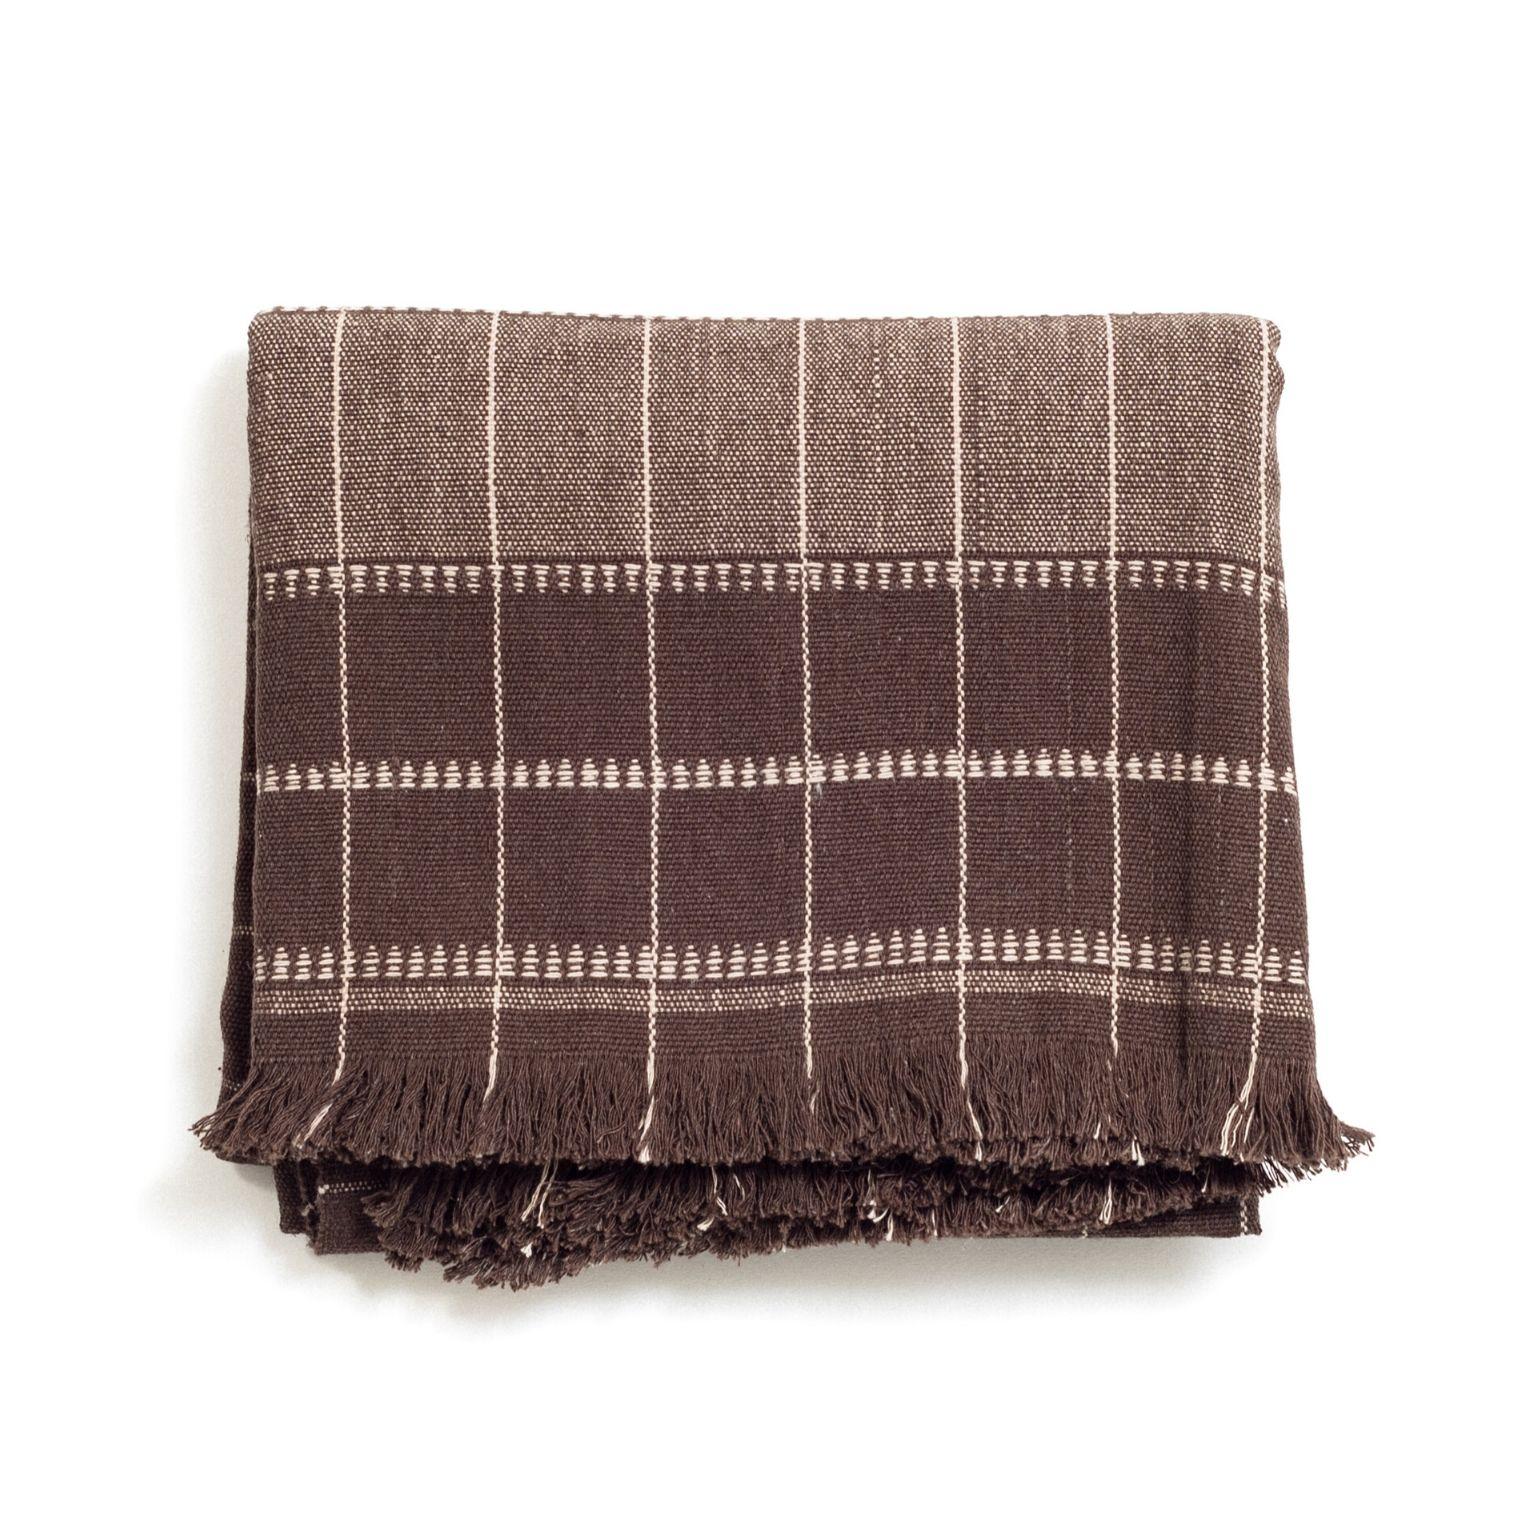 Custom design by Studio Variously, Treacle is a organic cotton Queen Size bedspread coverlet, handwoven by master weavers in Nepal.

A sustainable design brand based out of Michigan, Studio Variously exclusively collaborates with artisan